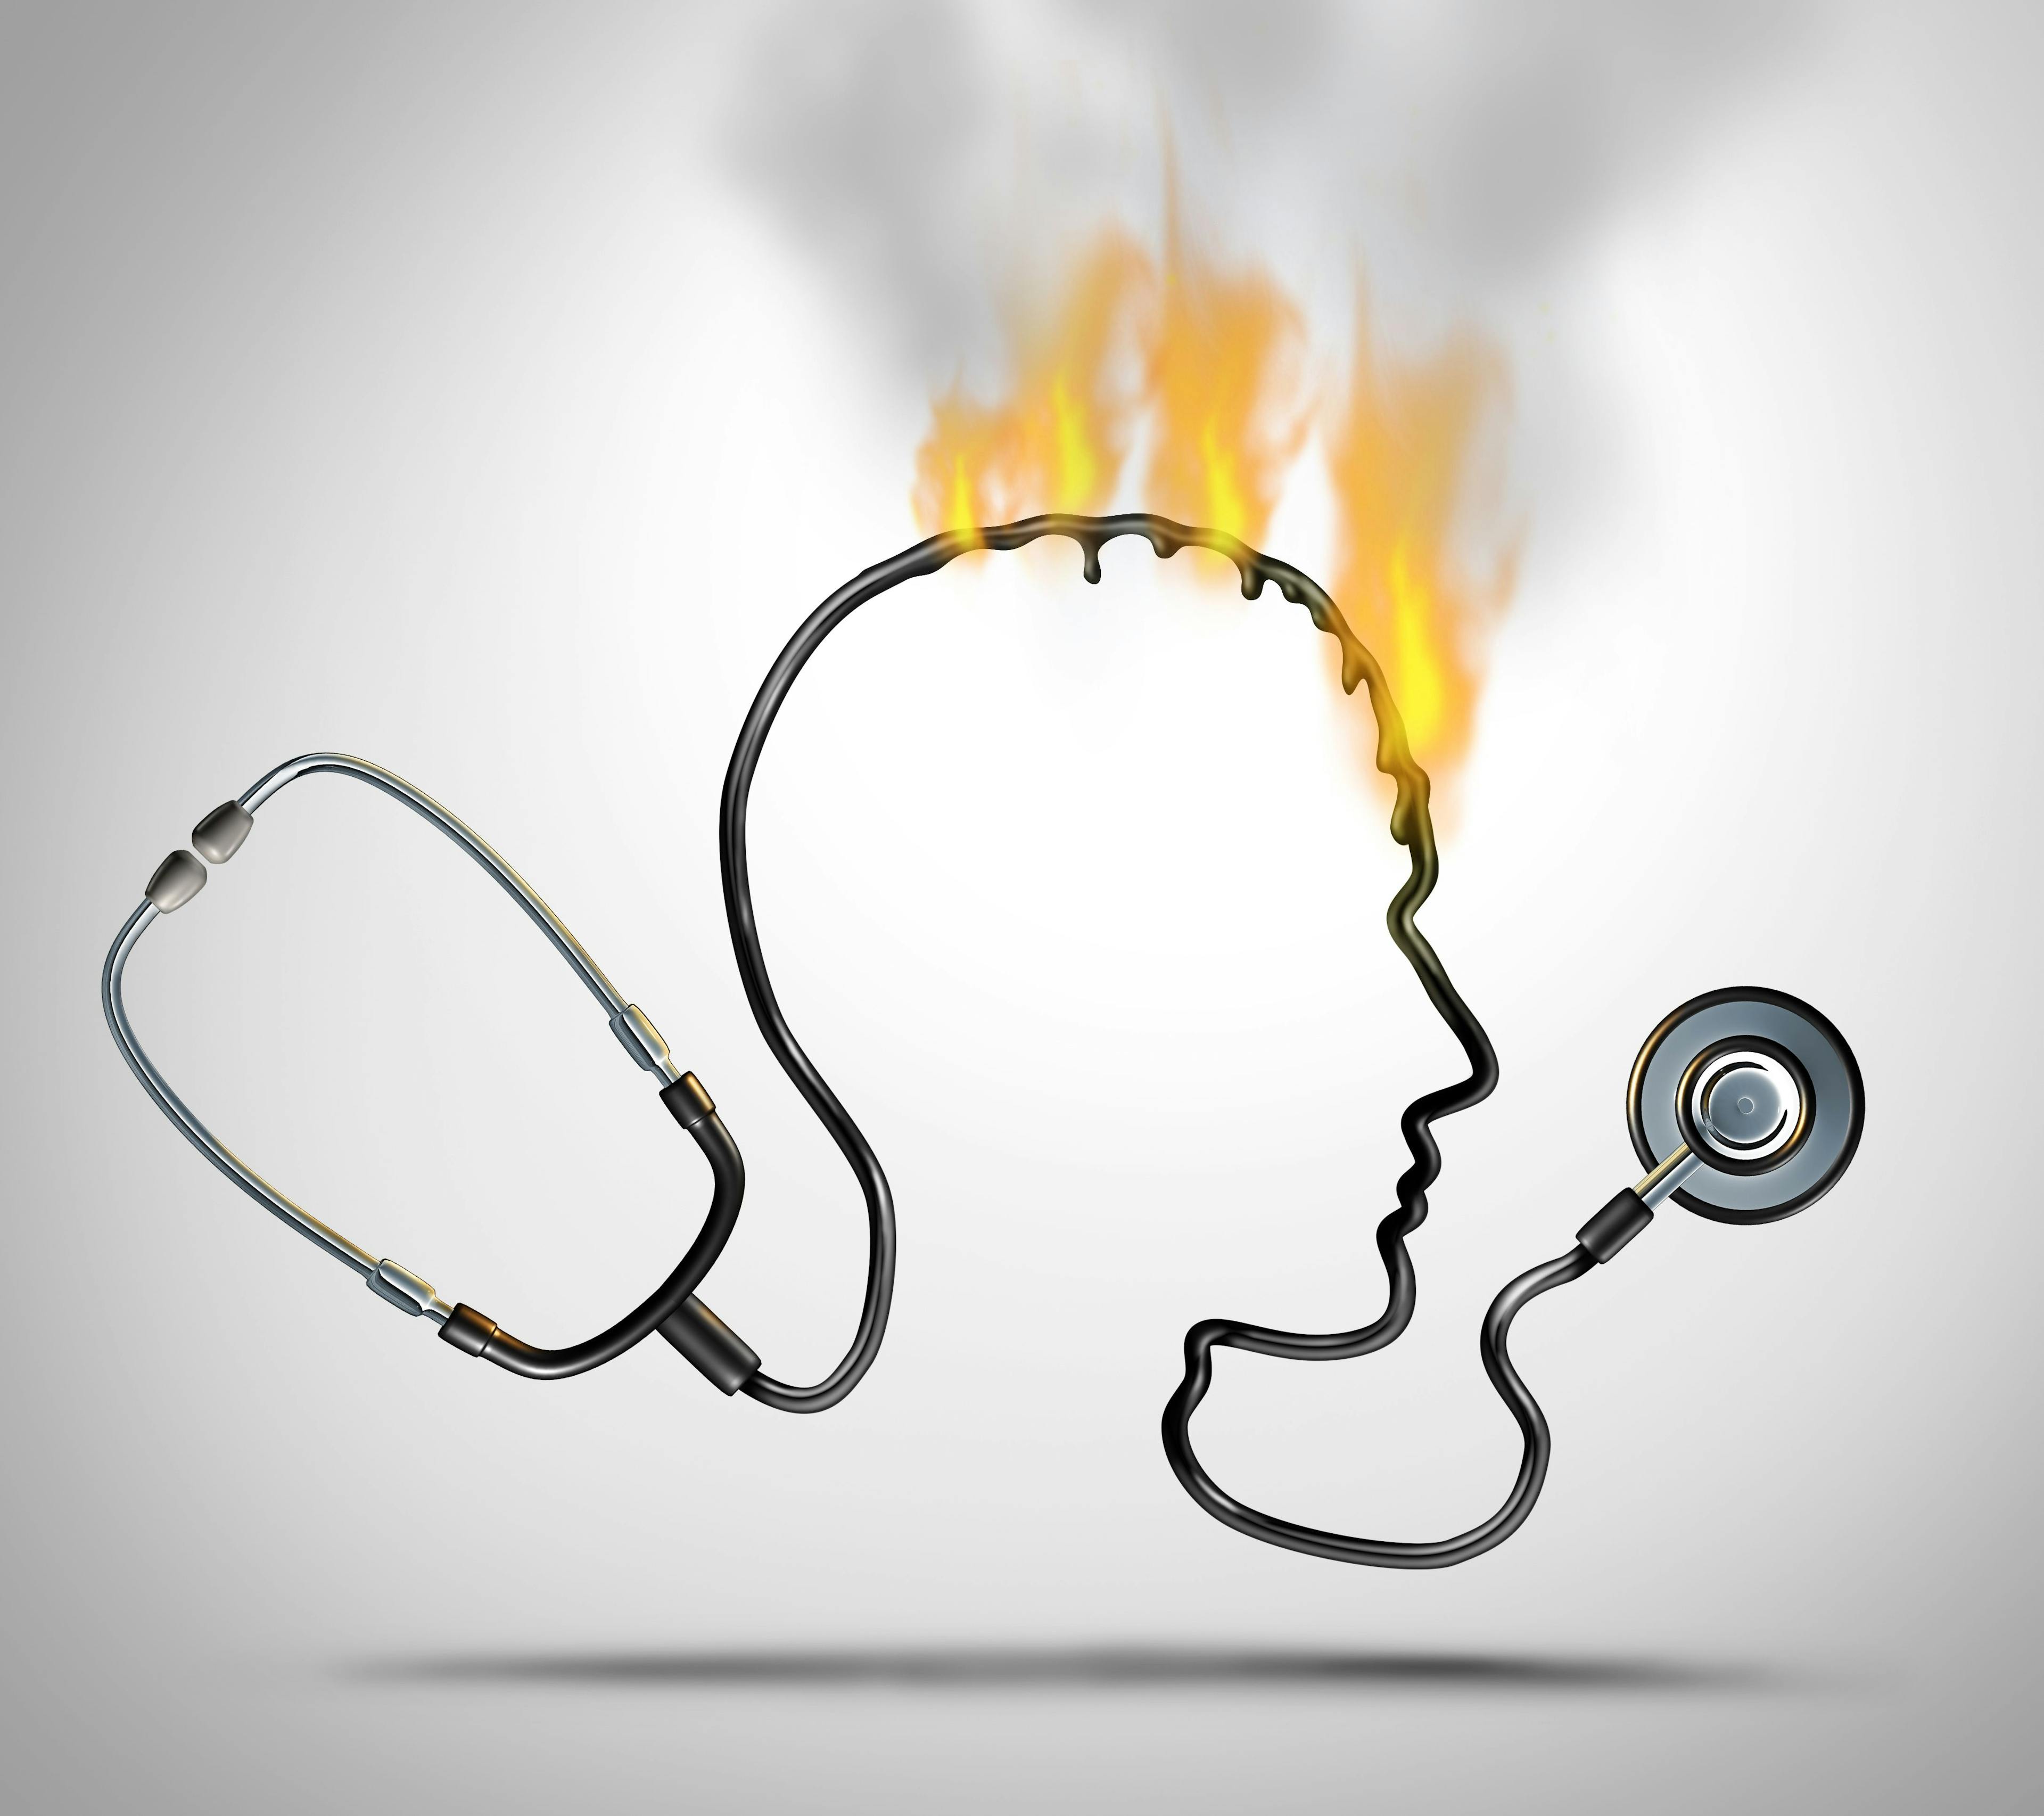 doctor shape formed by stethoscope on fire